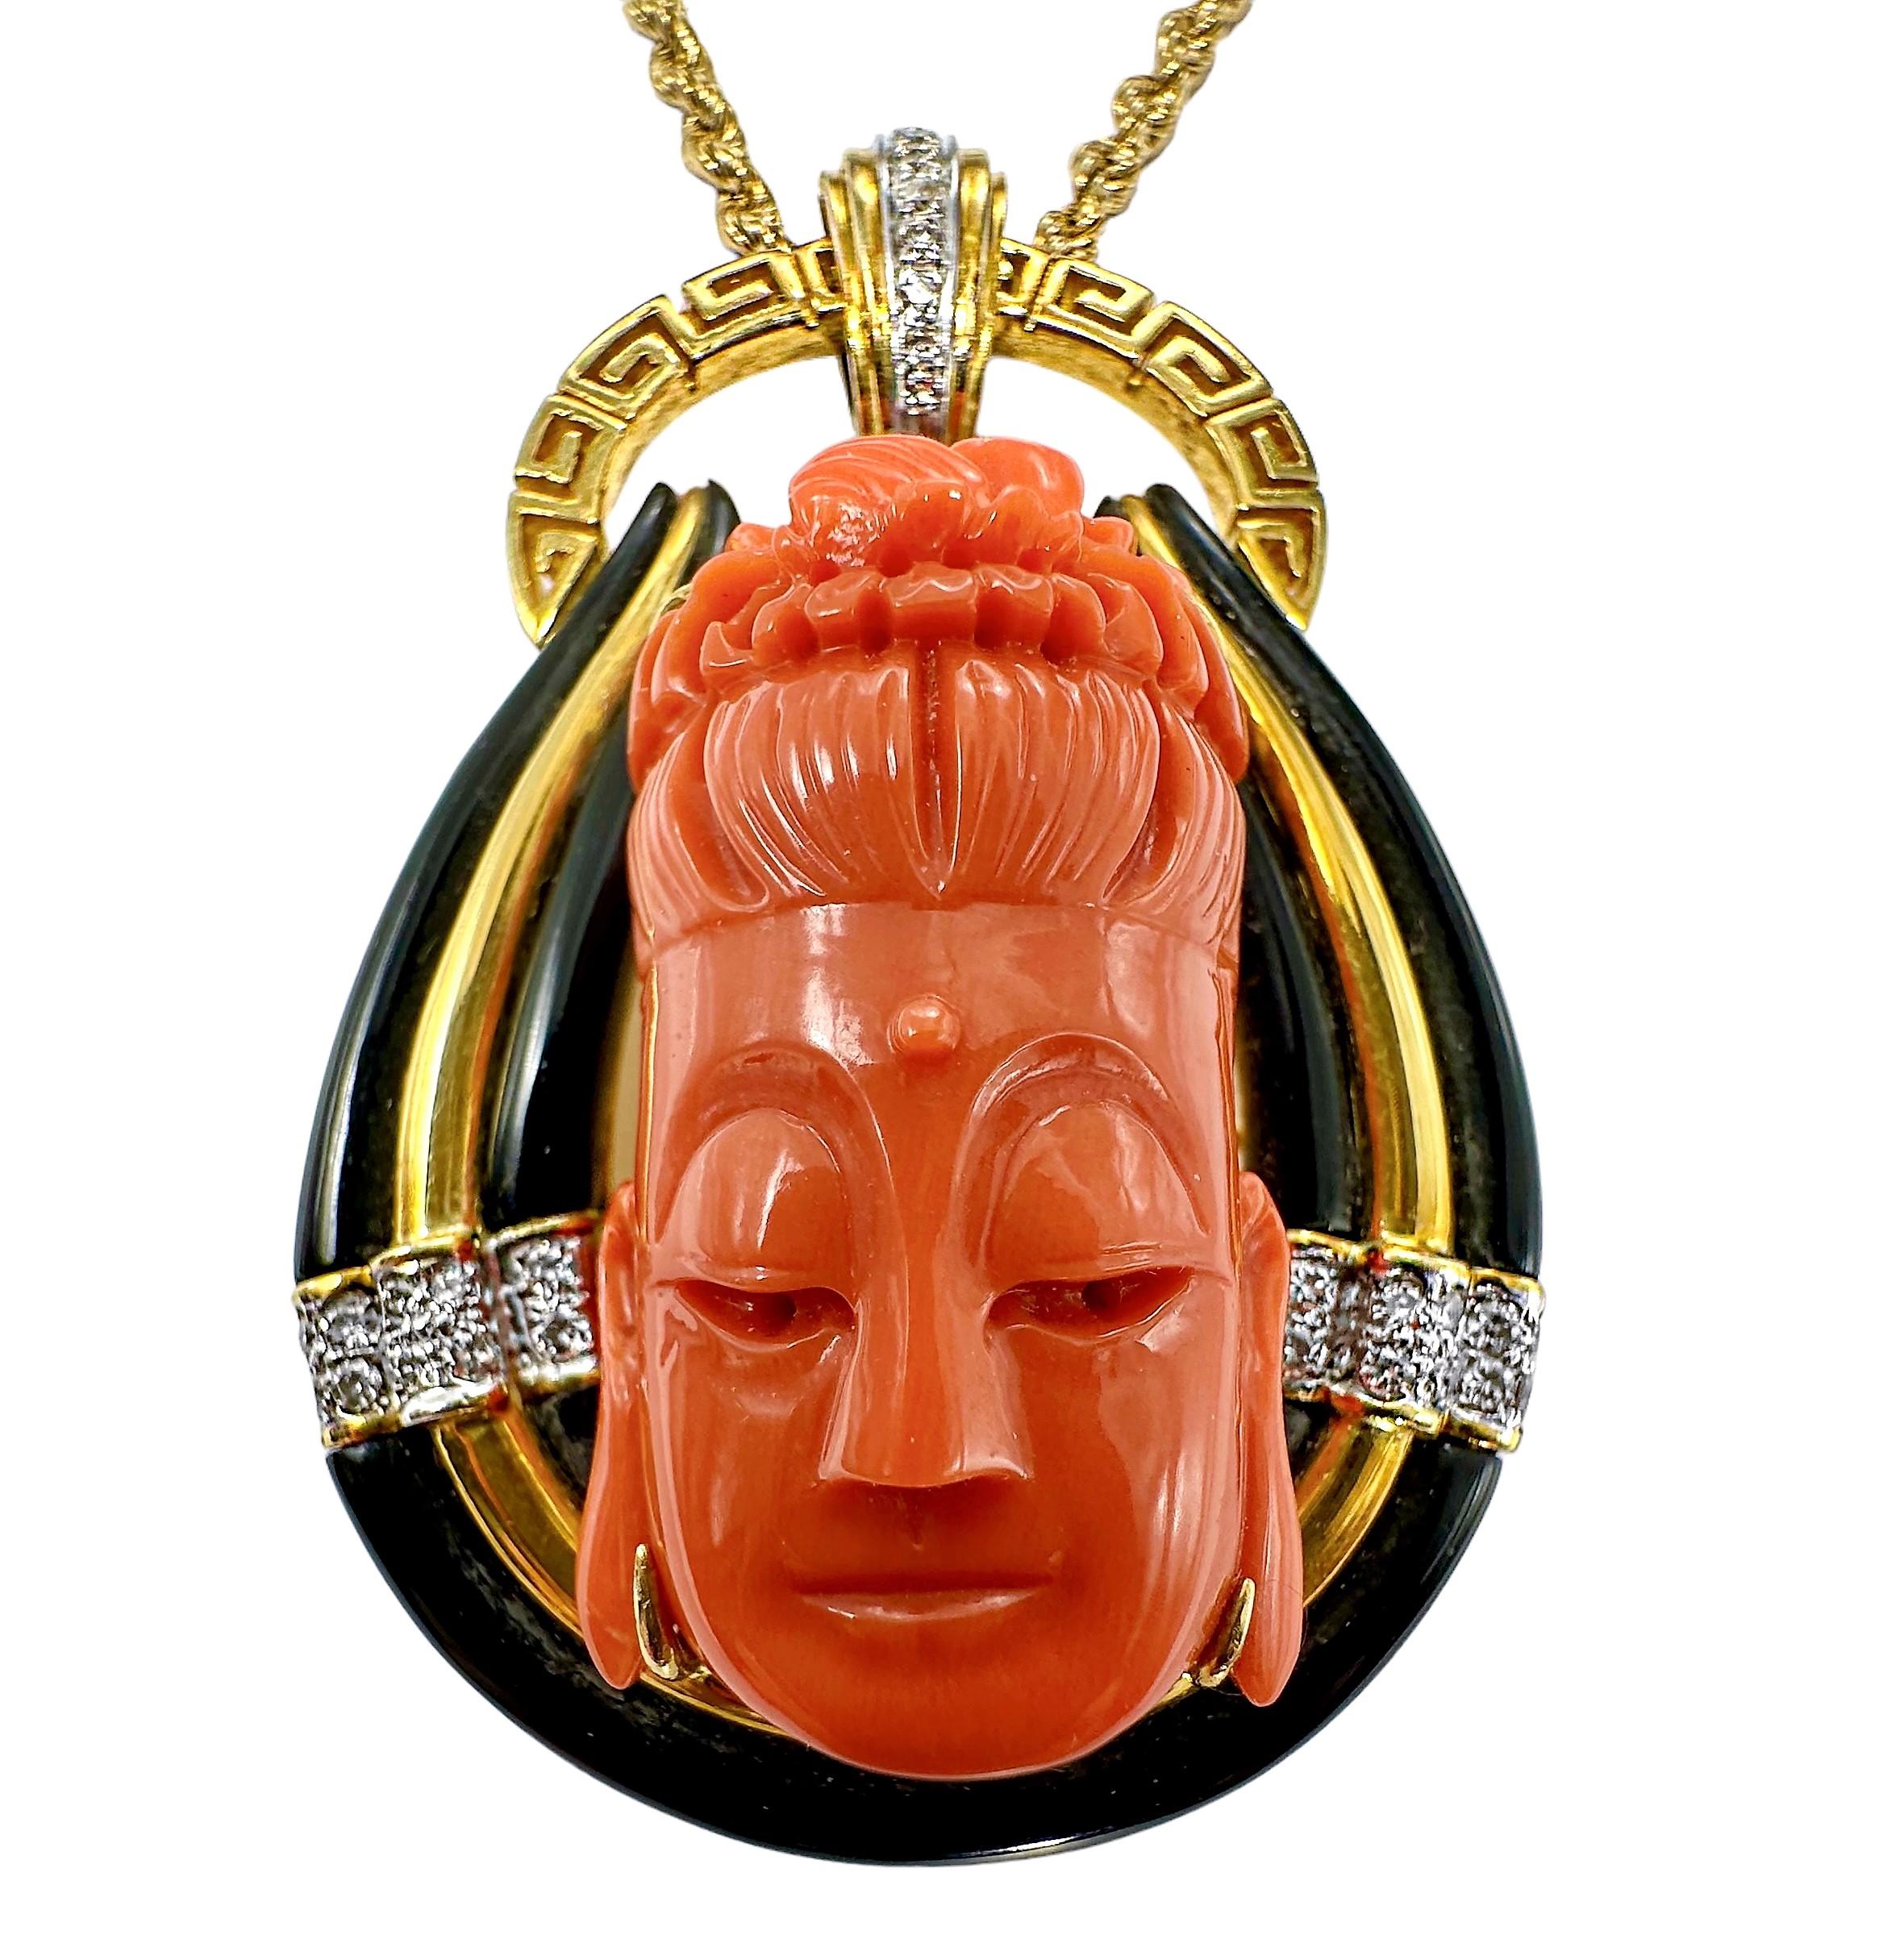 This very finely crafted 18K yellow gold, coral, onyx and diamond pendant was created by Larry Jewelry, a fixture in Hong Kong since the 1960's. This intriguing pendant measures a full 2 1/4 inches in height and 1 1/2 inches in width and is